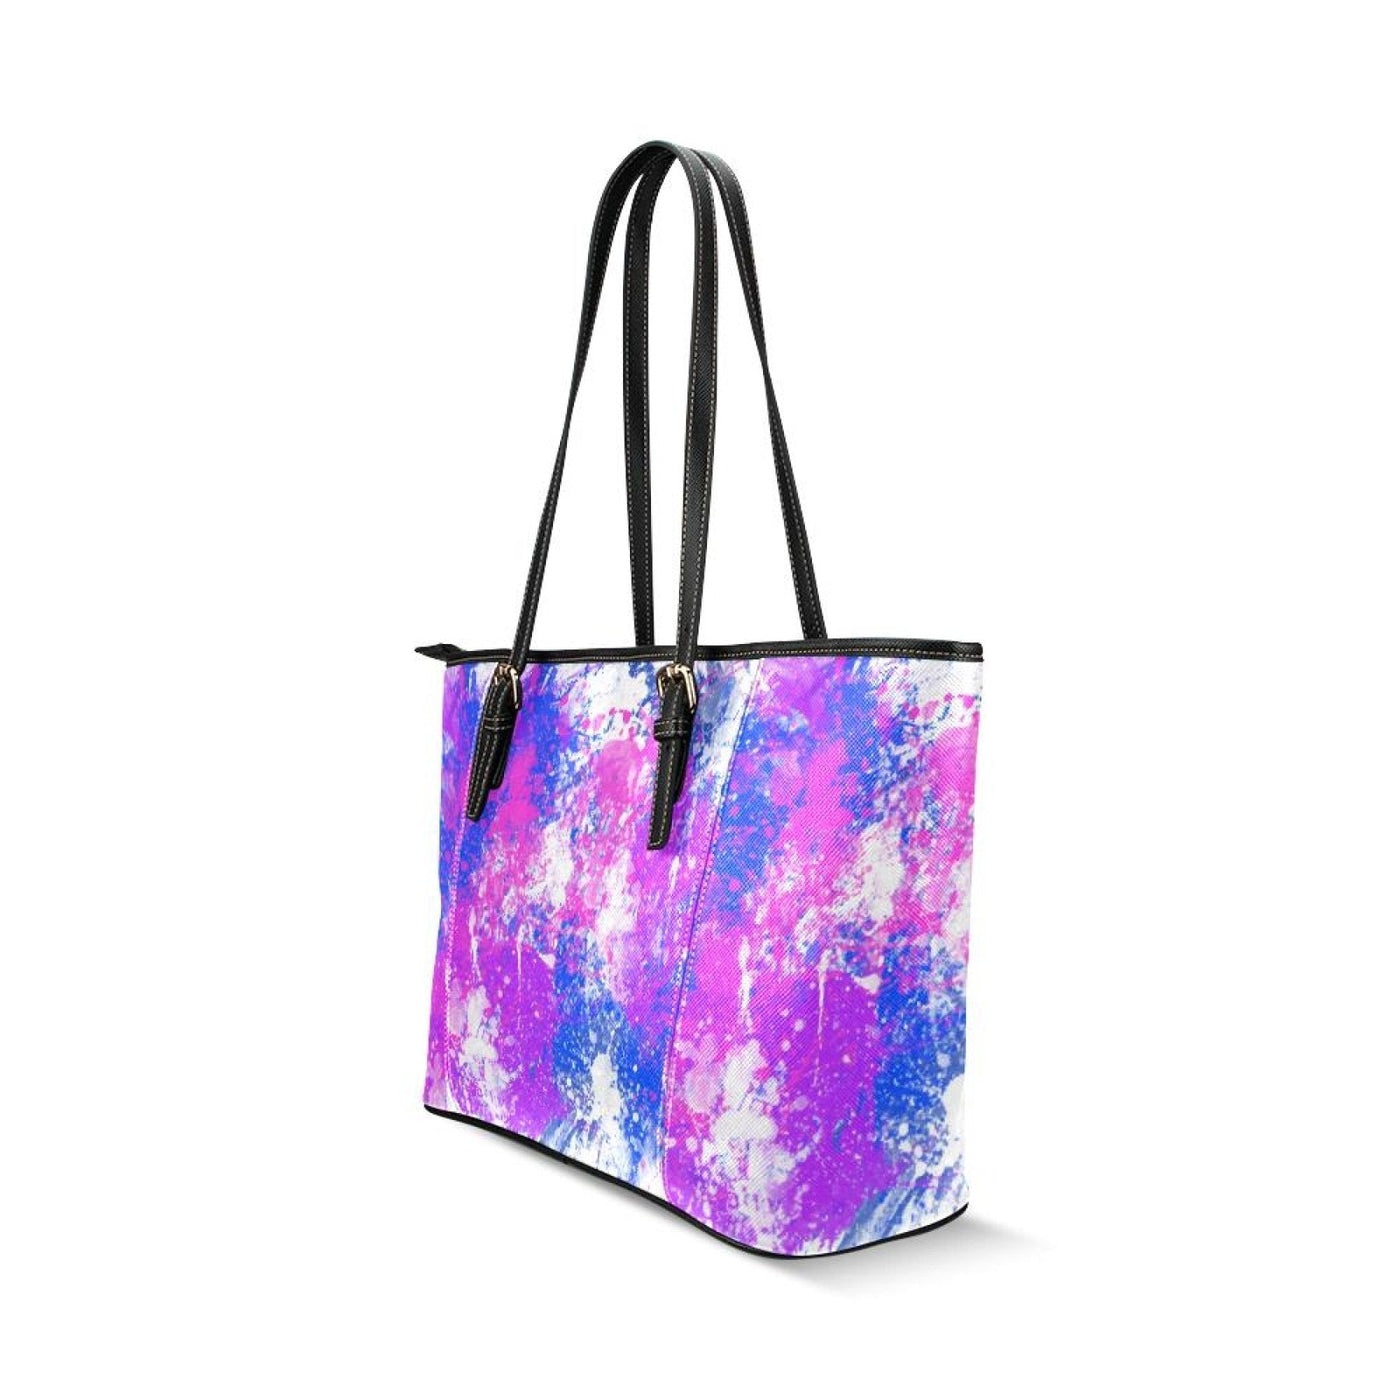 Large Leather Tote Shoulder Bag - Pink And Blue Cotton Candy Pattern